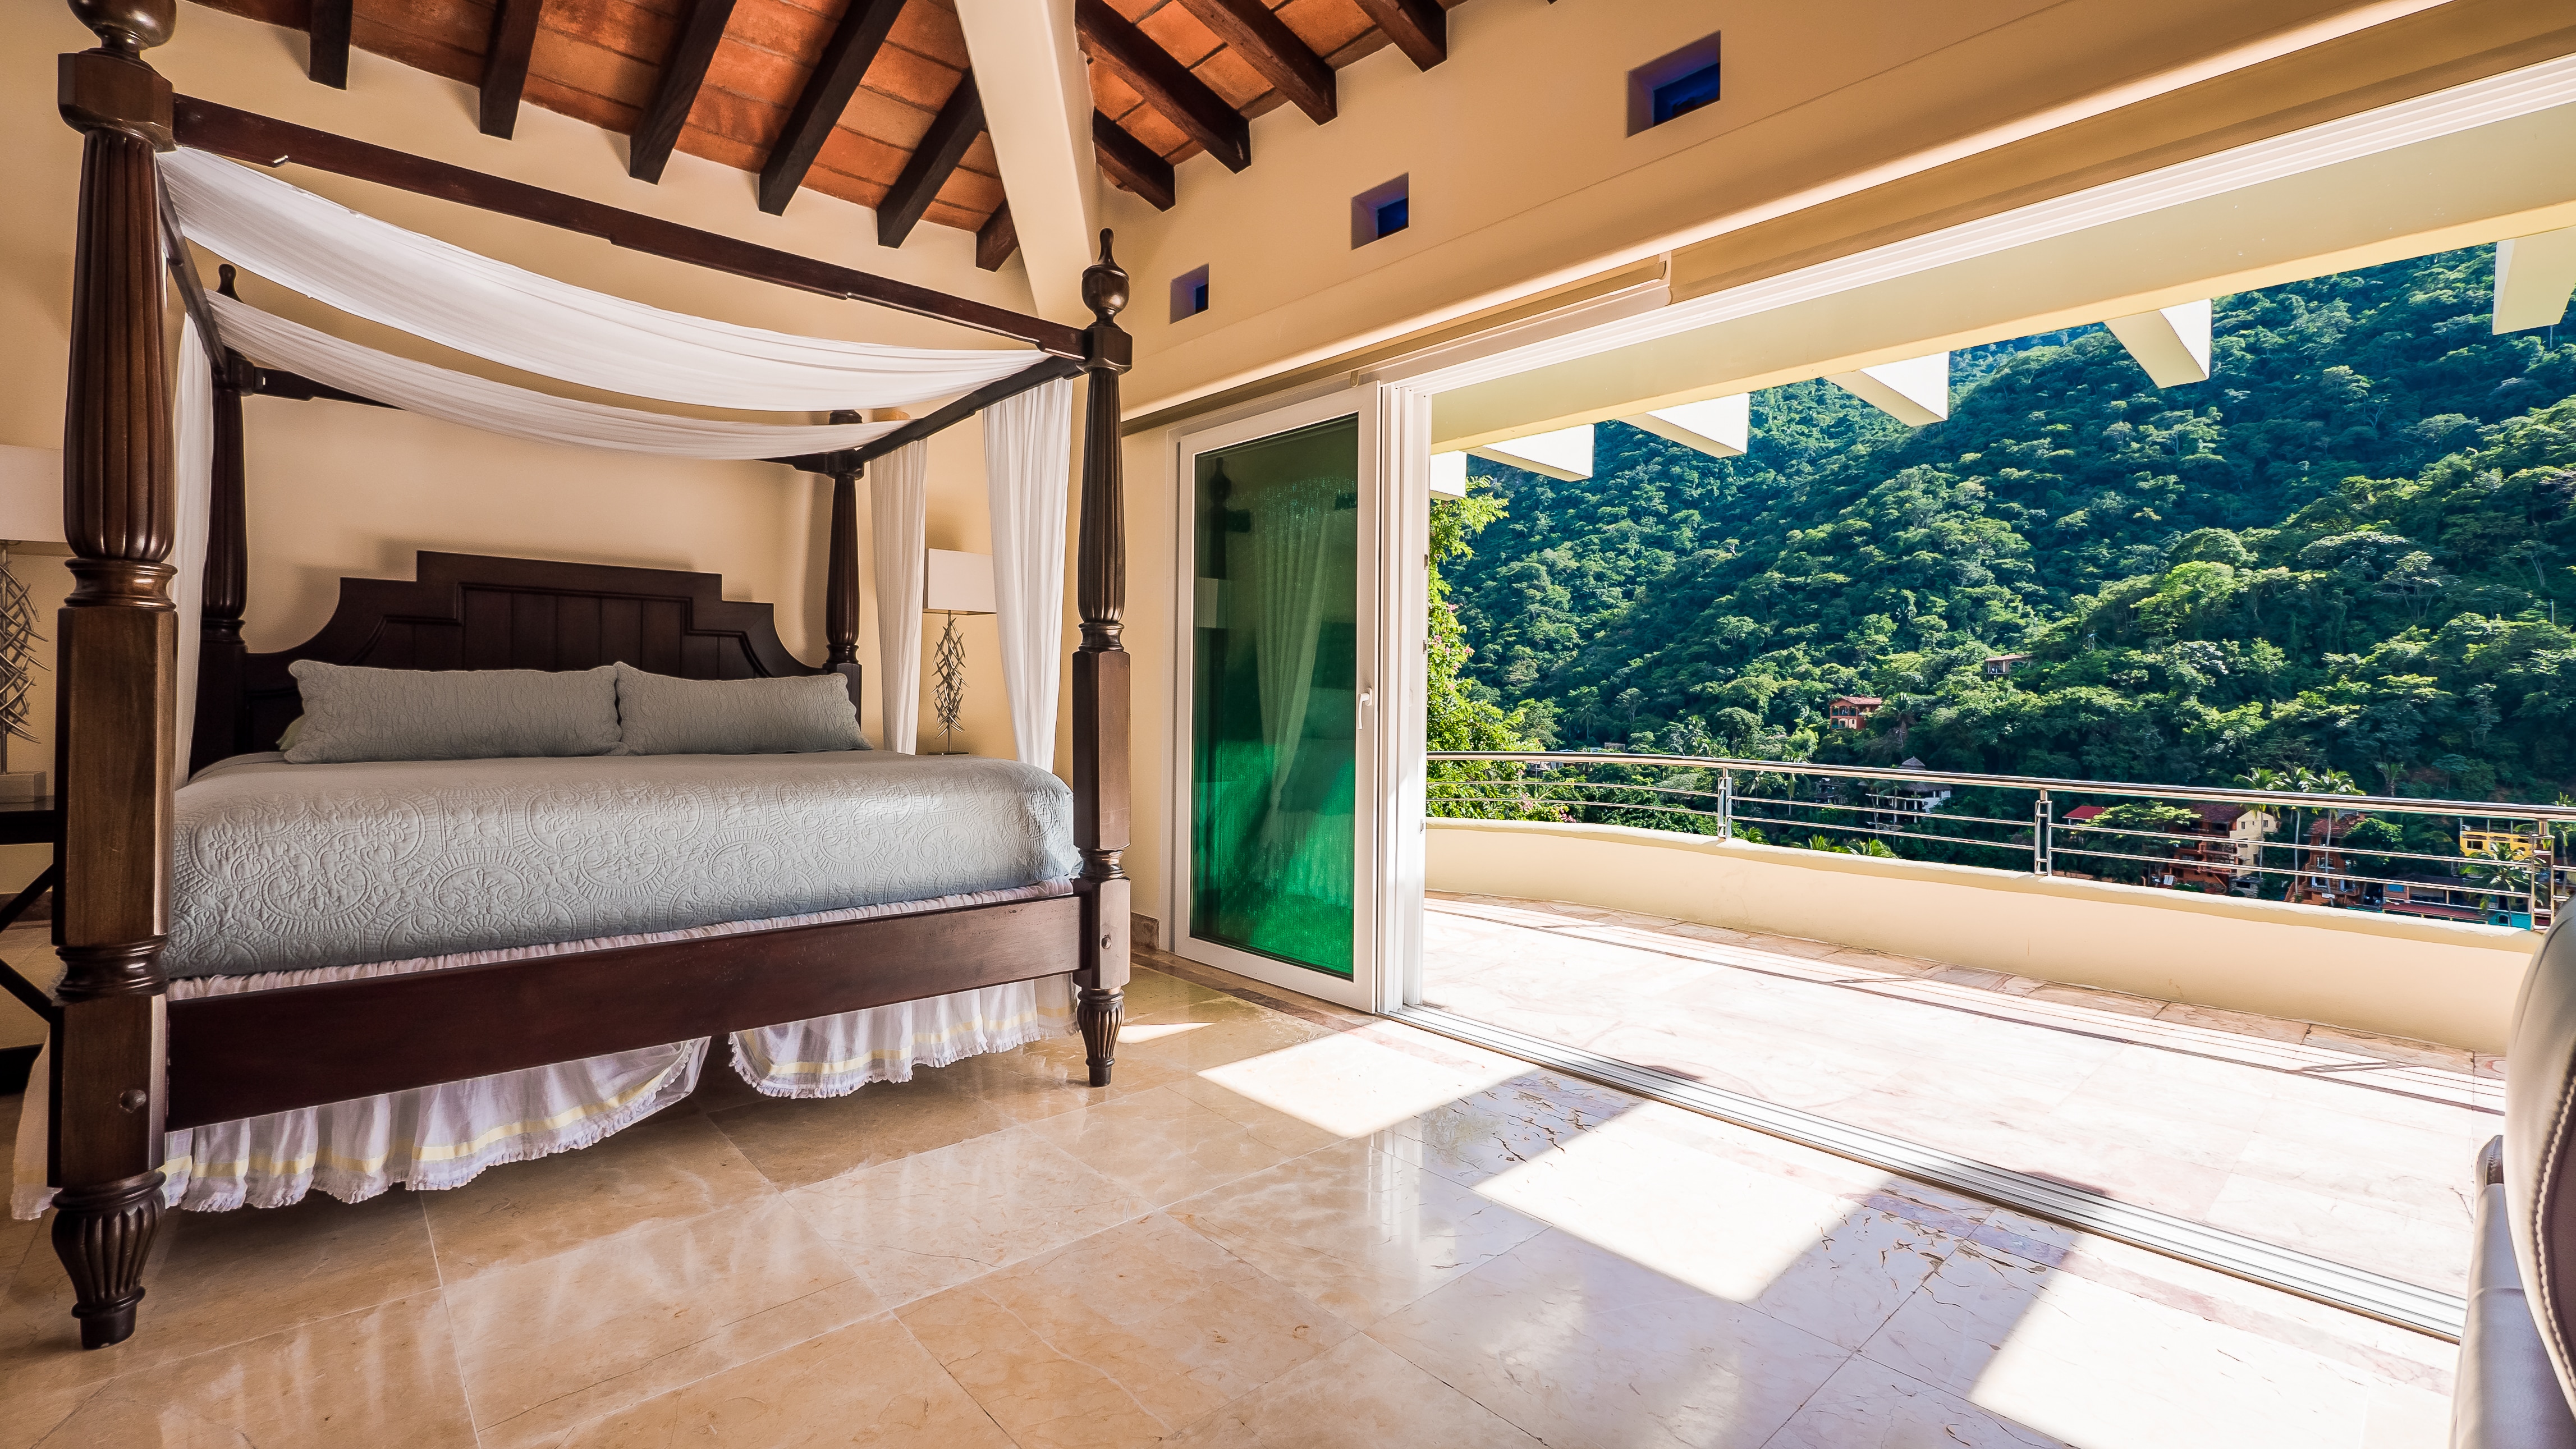 Property Image 2 - Penthouse with amazing Beach, Ocean, and tropical forest views